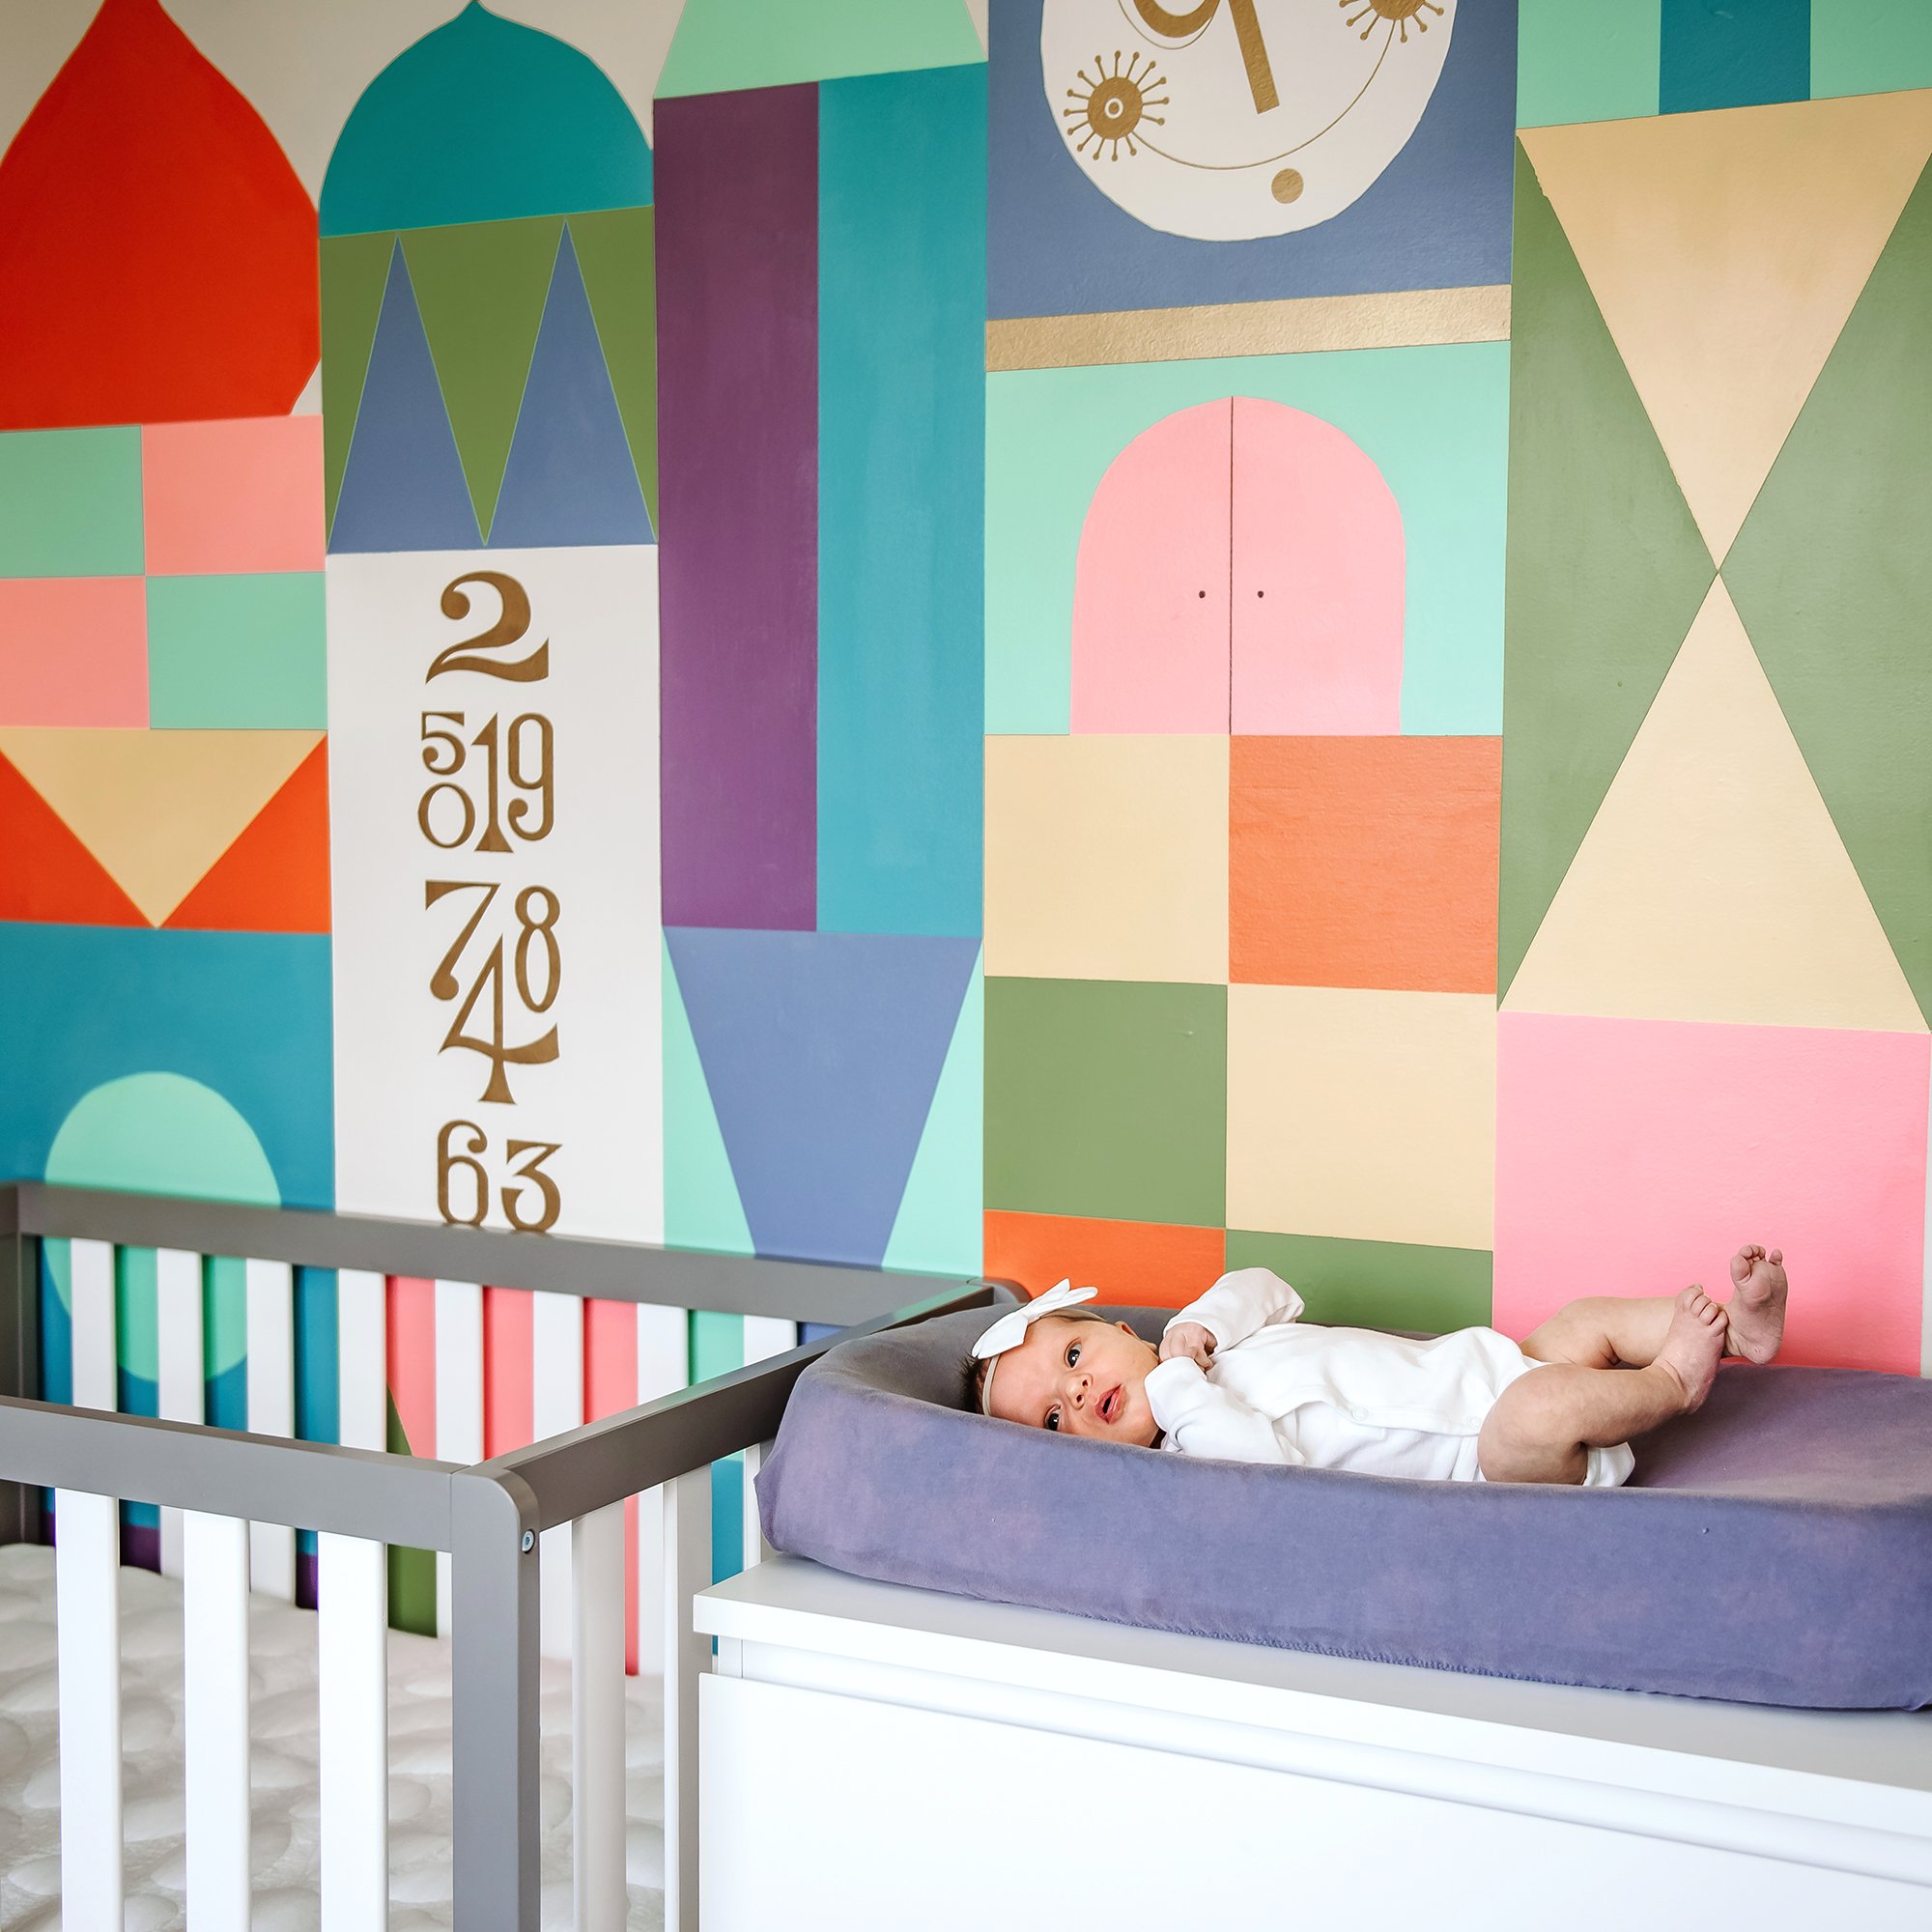 painted mural in nursery with newborn on changing table.jpg